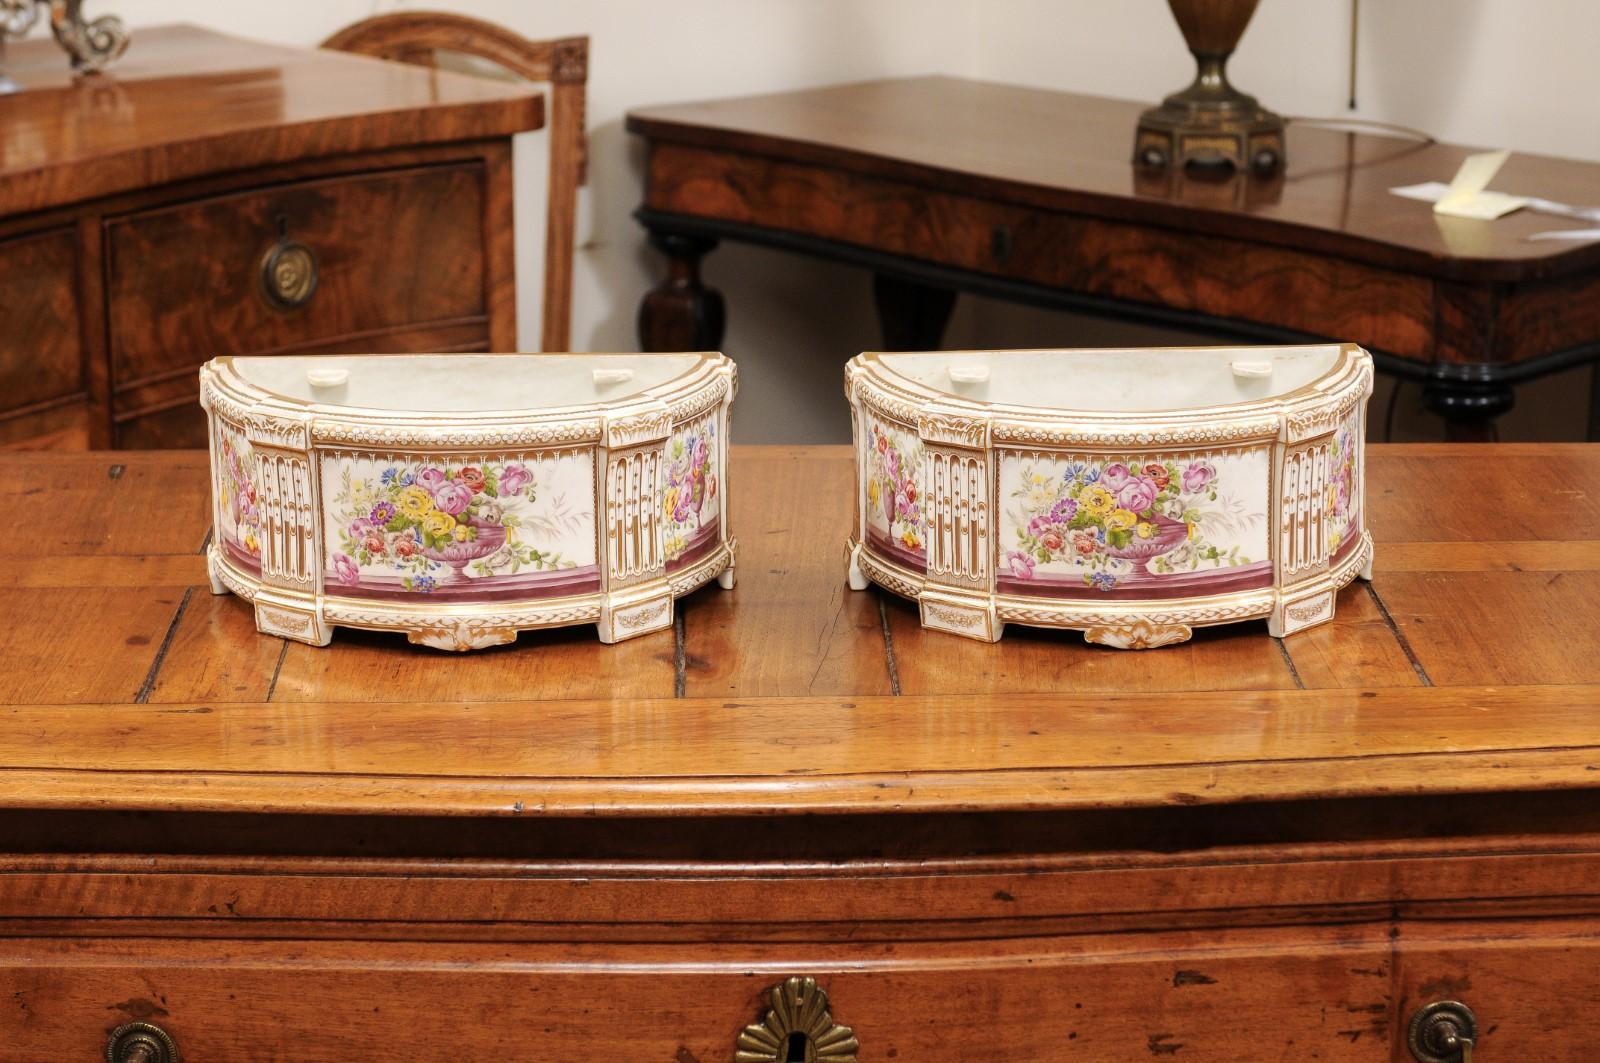 Pair of 19th Century French Porcelain Bough Pots with Gilt & Floral Accents For Sale 3